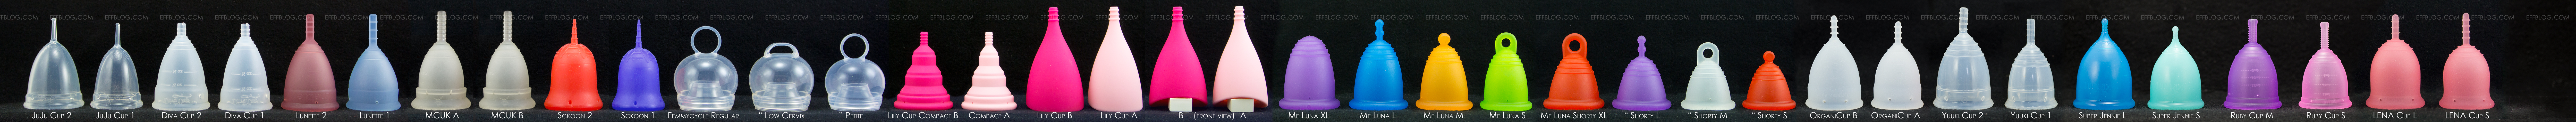 What Menstrual Cup Is Right For You?